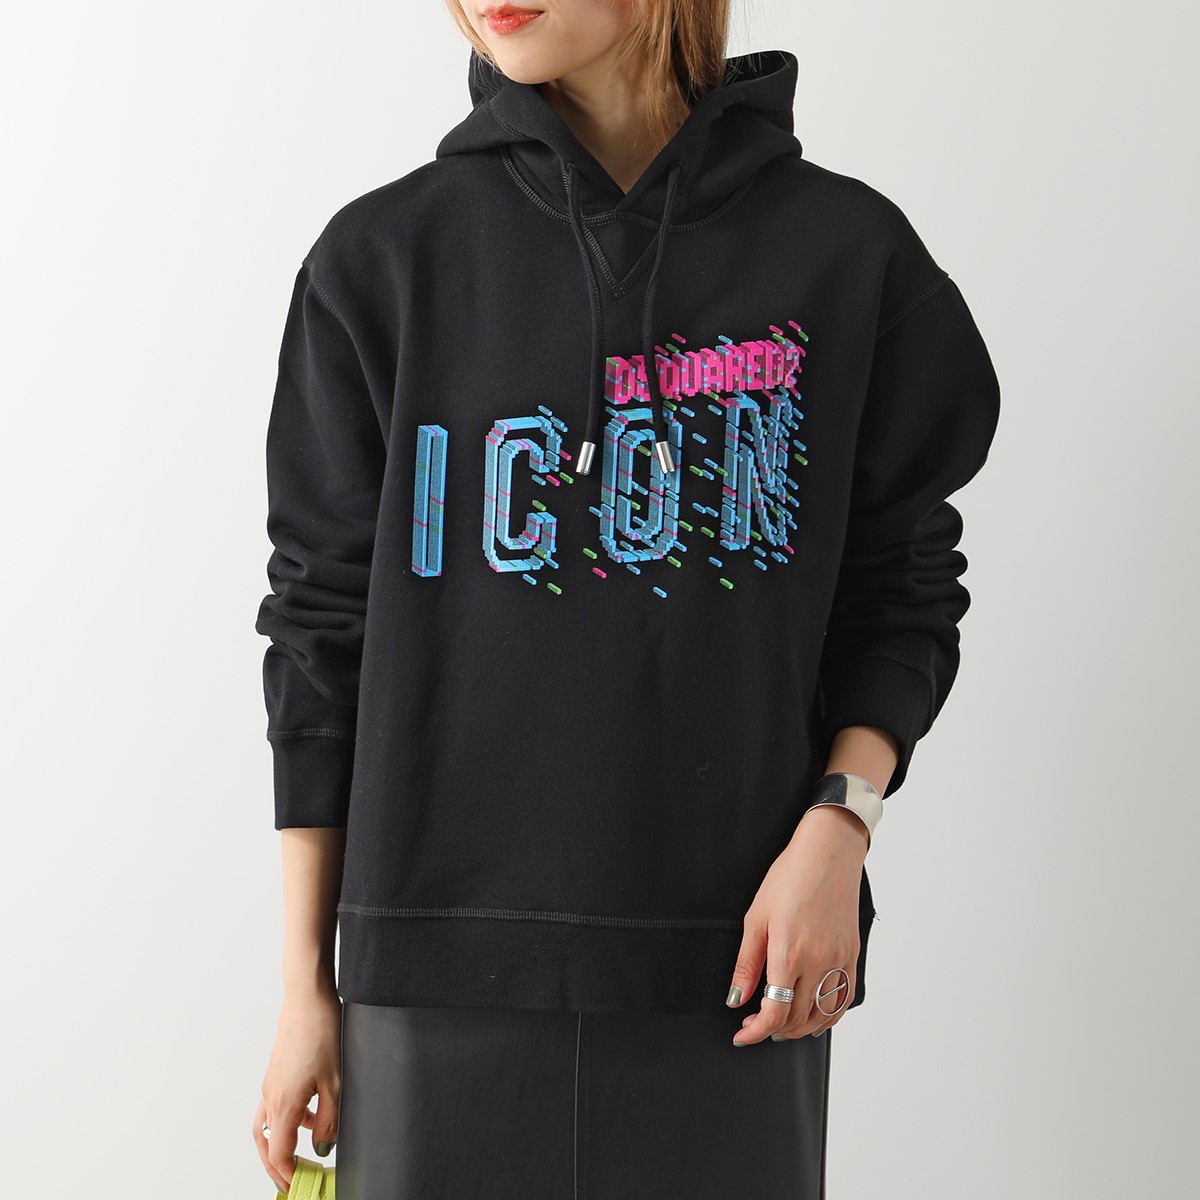 DSQUARED2 ディースクエアード パーカー ICON PIXELED COOL HOODIE S80GU0093 S25516 スウェット プルオーバー アイコン ロゴ カラー2色｜s-musee｜03